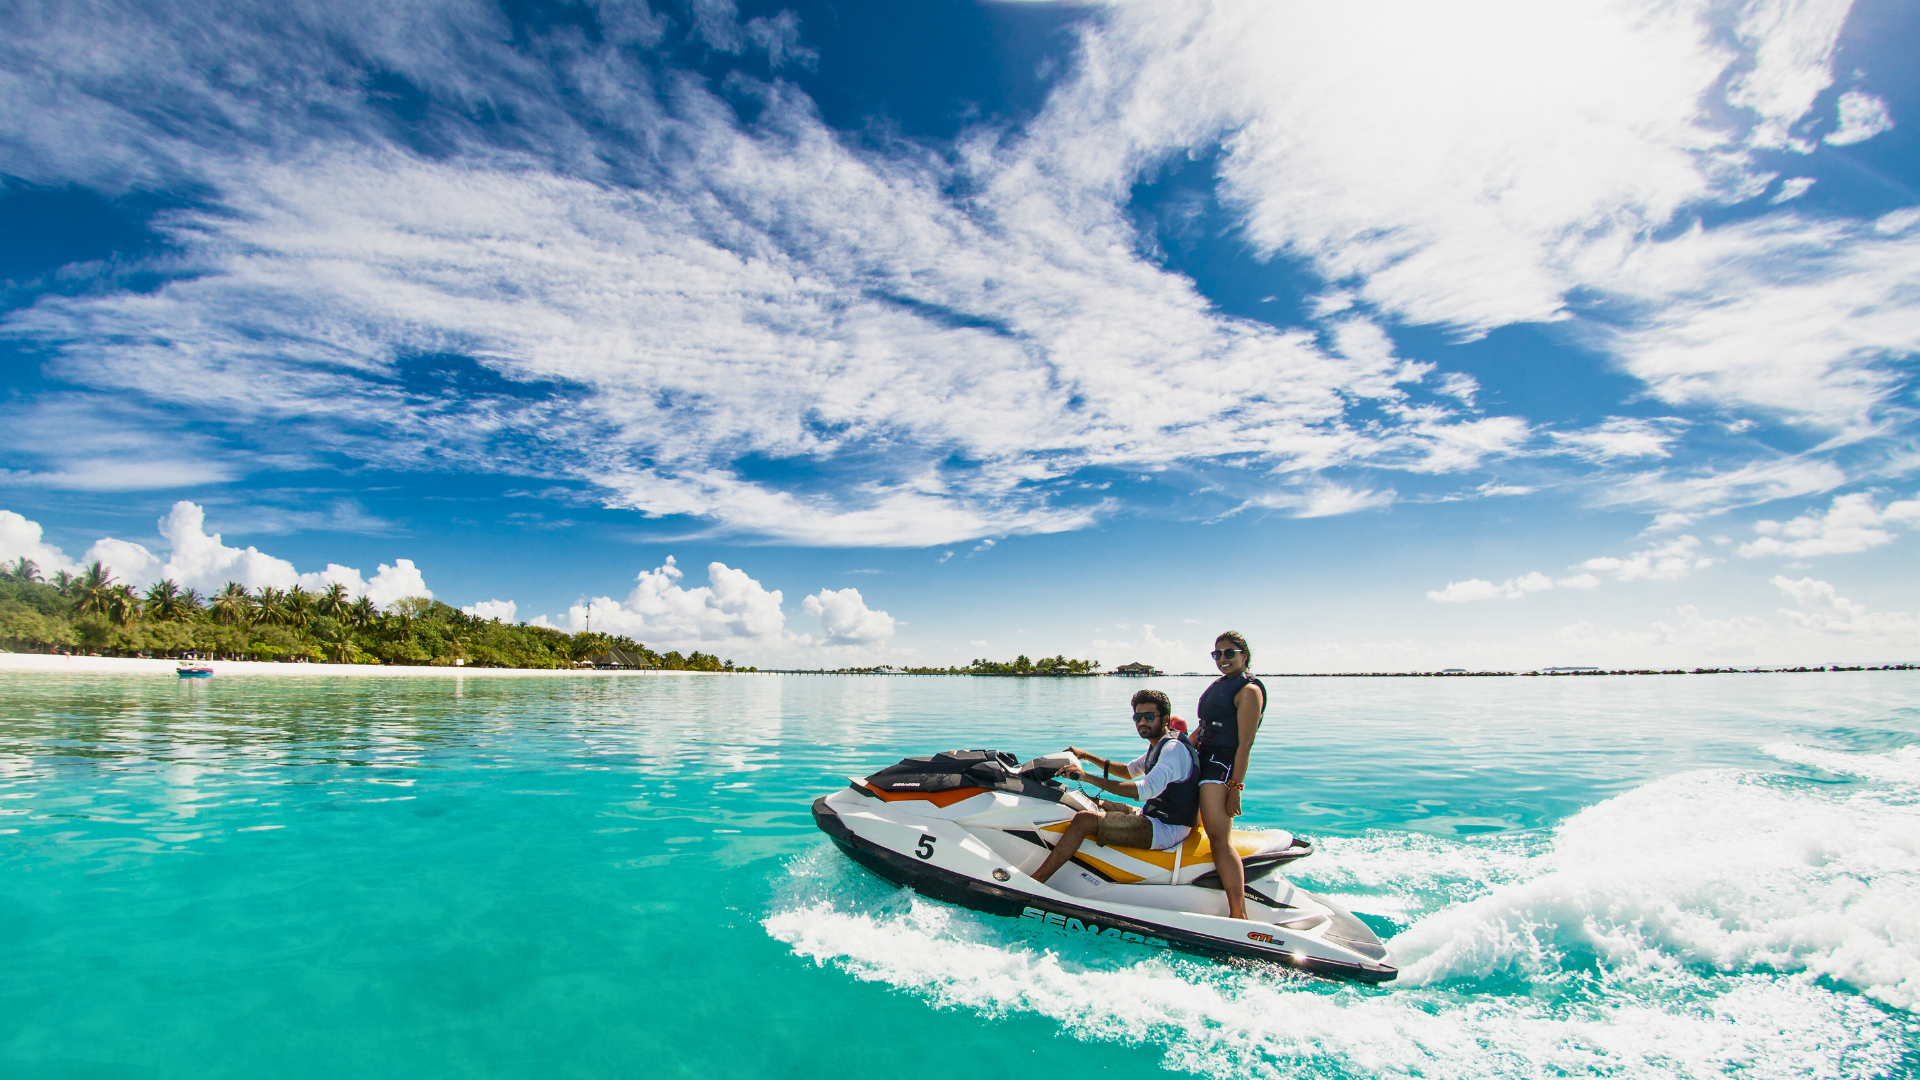 jet skiing and water sports in andaman and nicobar islands